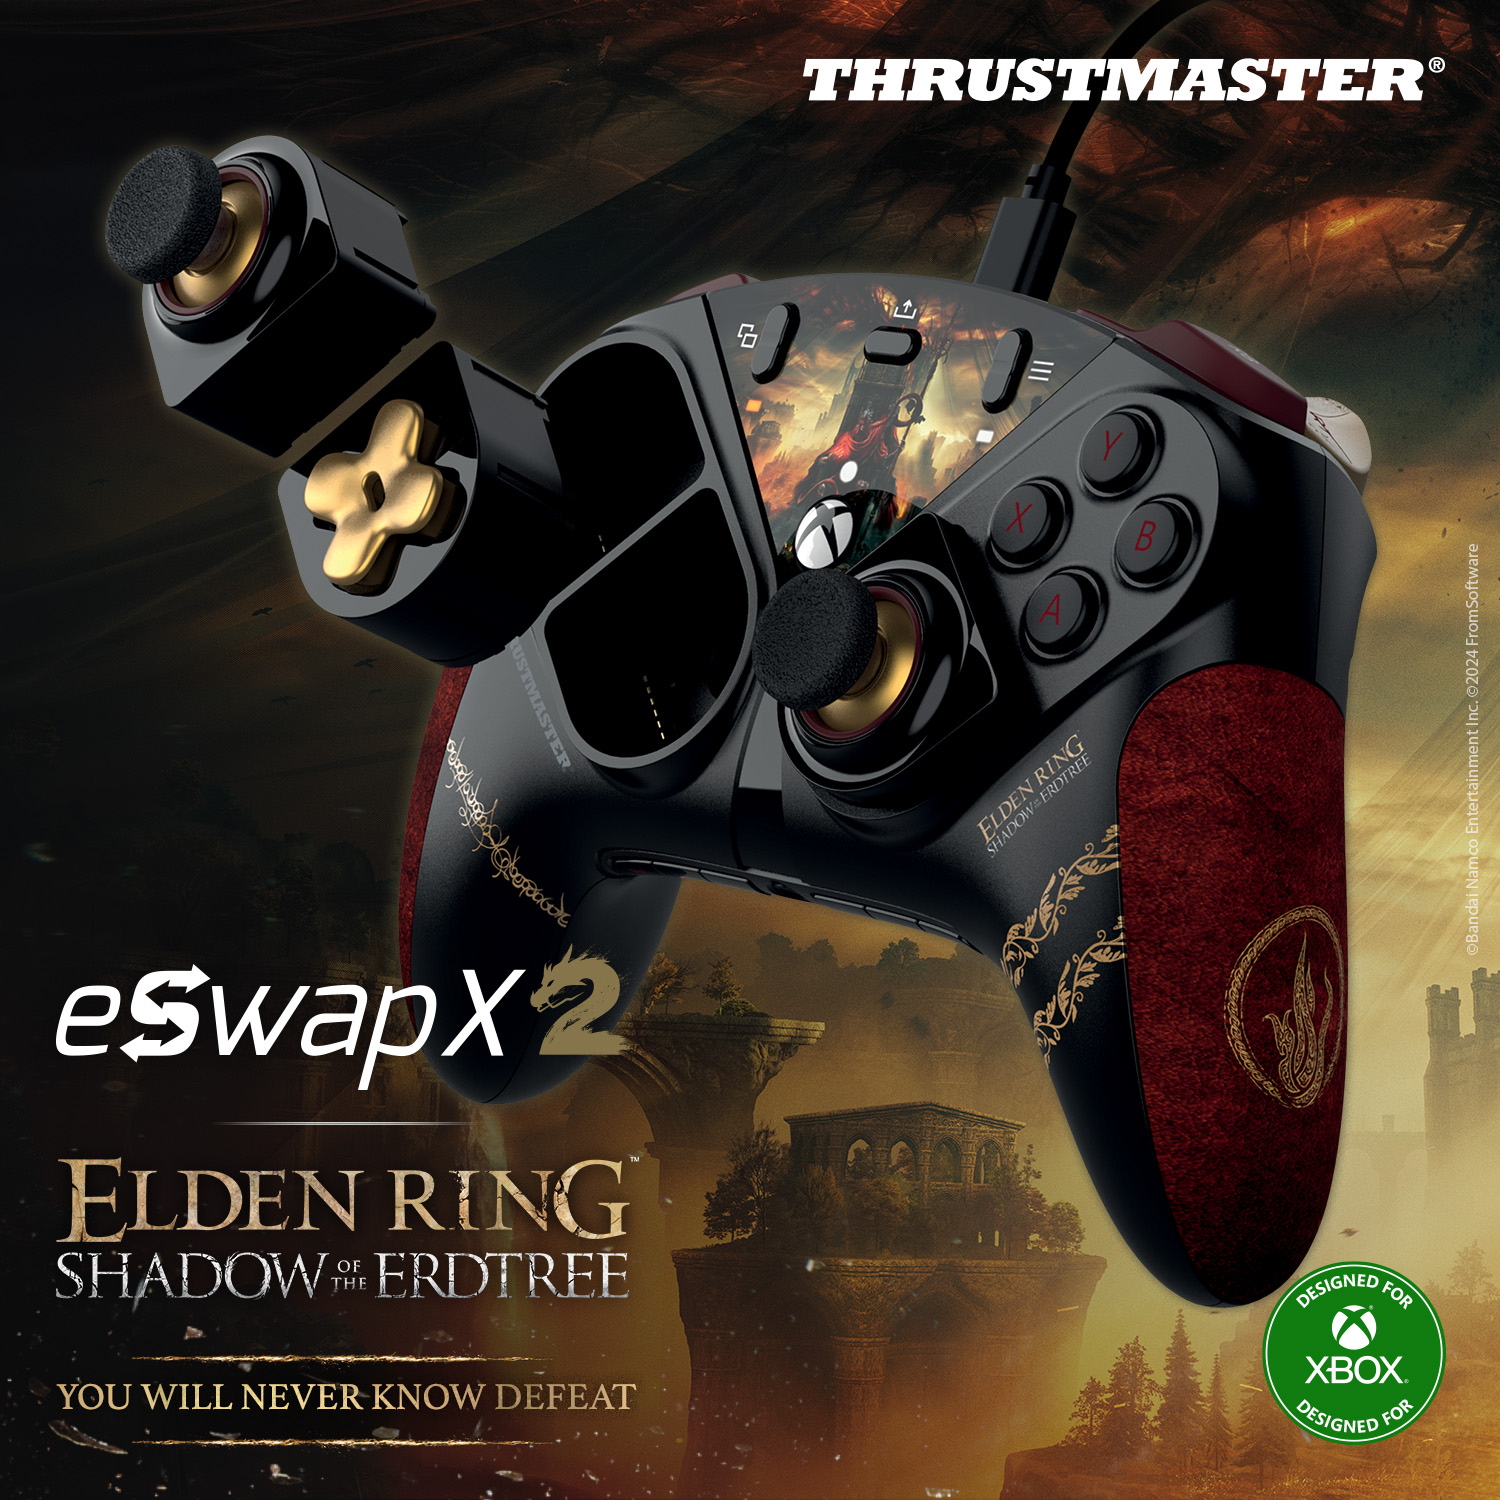 Eswap X 2 Elden ring Officialy Licensed Product